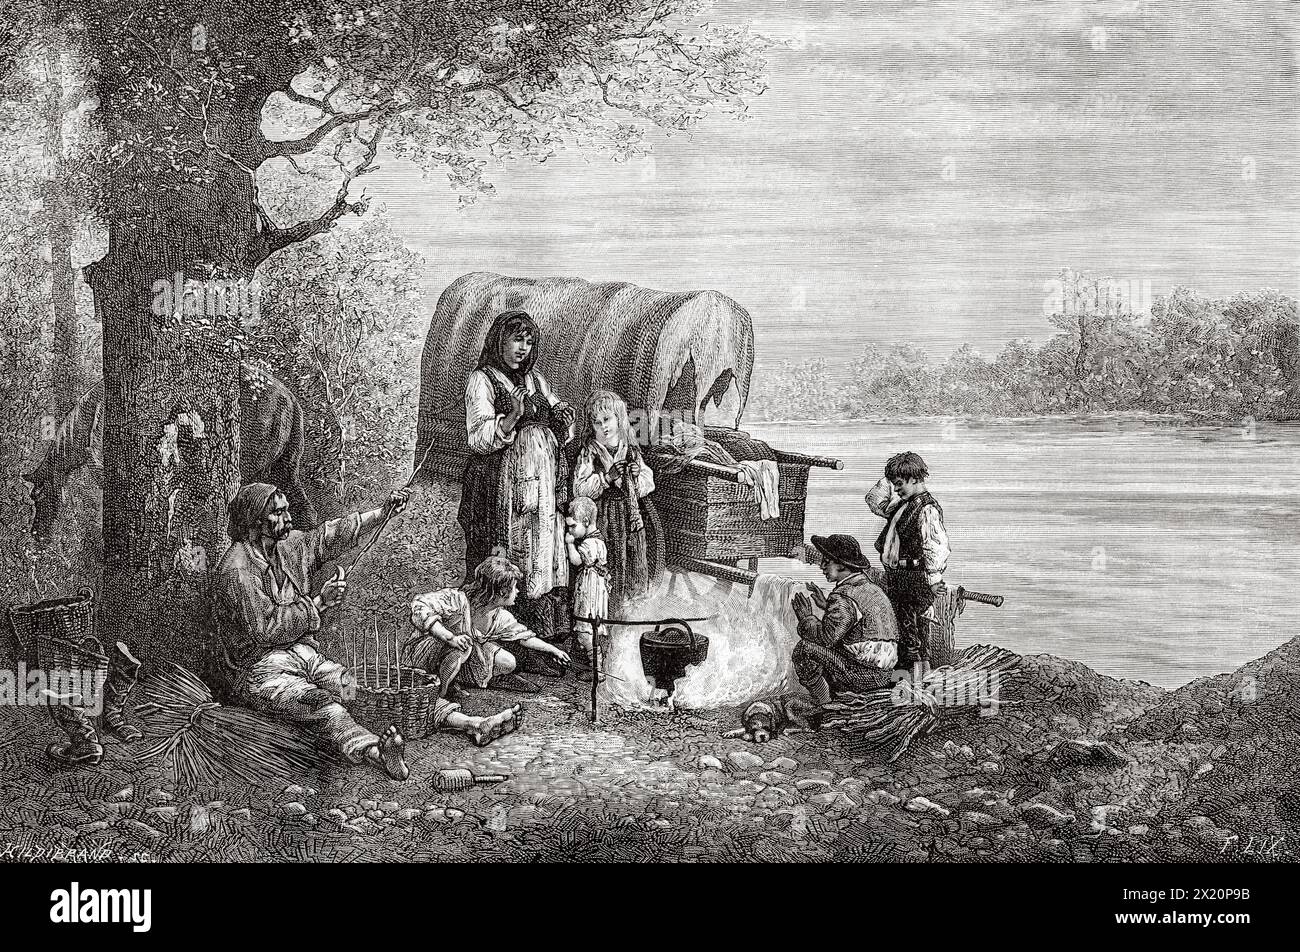 Family of basket makers on the banks of the Rhine River, Alsace, France. Drawing by  Frédéric Théodore LIX (1830 - 1897) Through Alsace and Lorraine, 1884 By Charles Grad (1842 - 1890) Le Tour du Monde 1886 Stock Photo